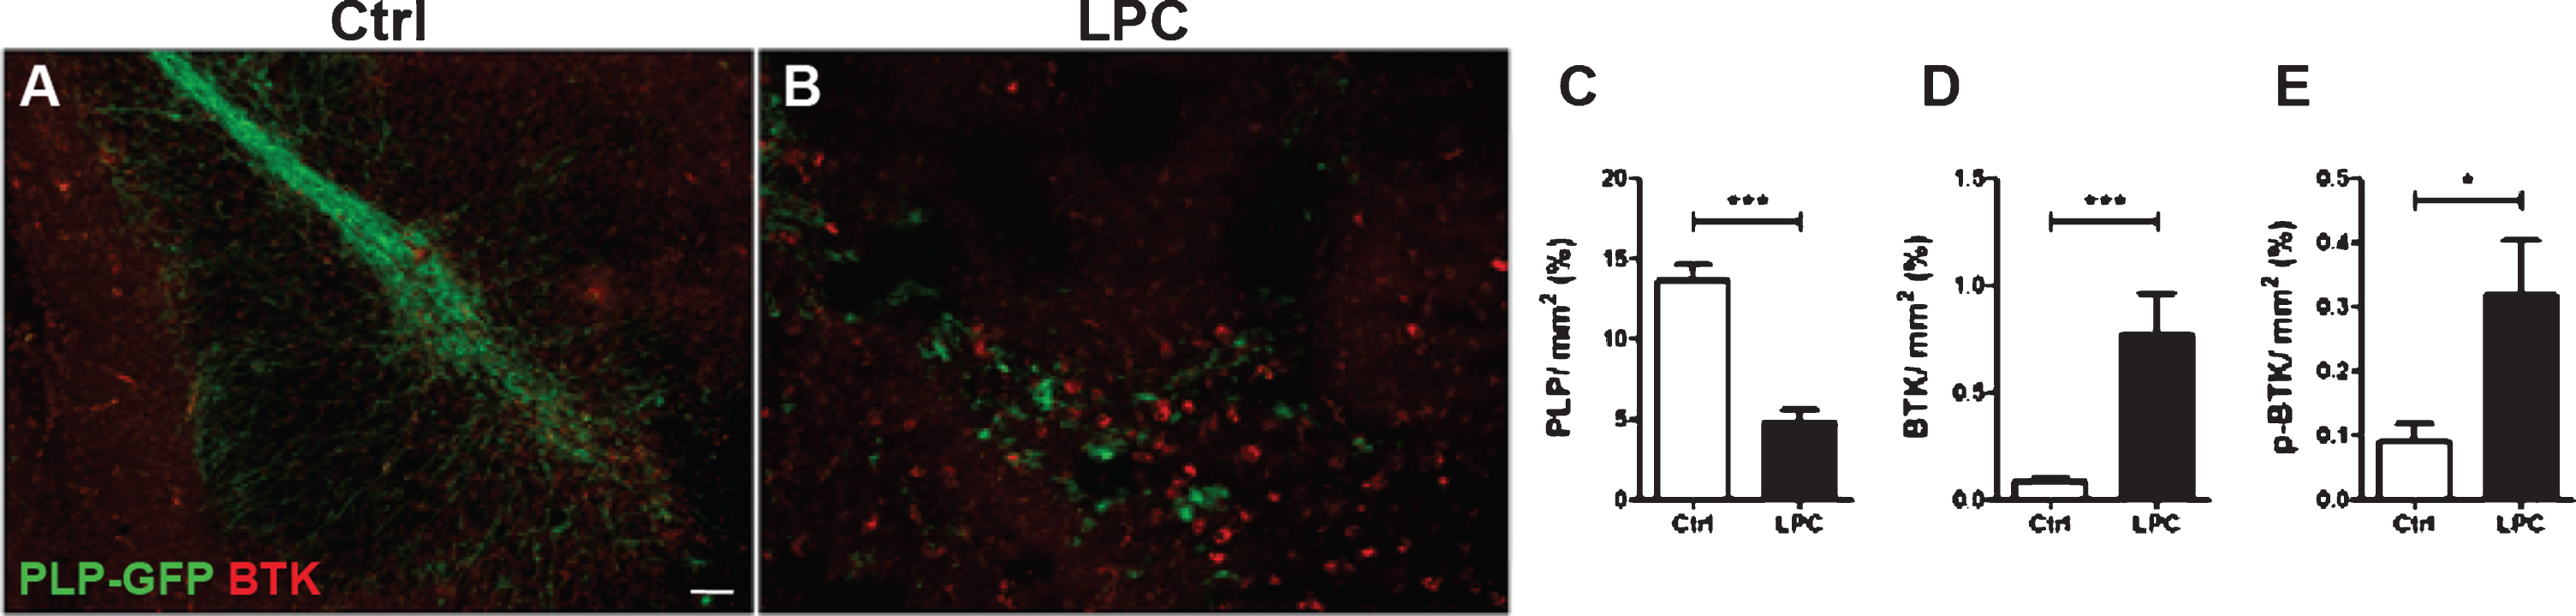 Increased BTK signal upon demyelination. Cerebellar organotypic slices from P9 Plp-GFP mouse (green oligodendrocytes and myelin) were maintained in culture (A) or subjected to LPC treatment at 6 days in vitro (DIV) for 16–17 h (B) before being immunostained for BTK (red) or p-BTK at DIV9. LPC treatment induced a demyelination (loss of GFP signal B, C) and a concomitant 8.5-fold increase in BTK signal (B, D). Similarly, p-BTK was also increased after LPC demyelination (E). (*p < 0.01; ***p < 0.0001). Scale bar = 100 μm.